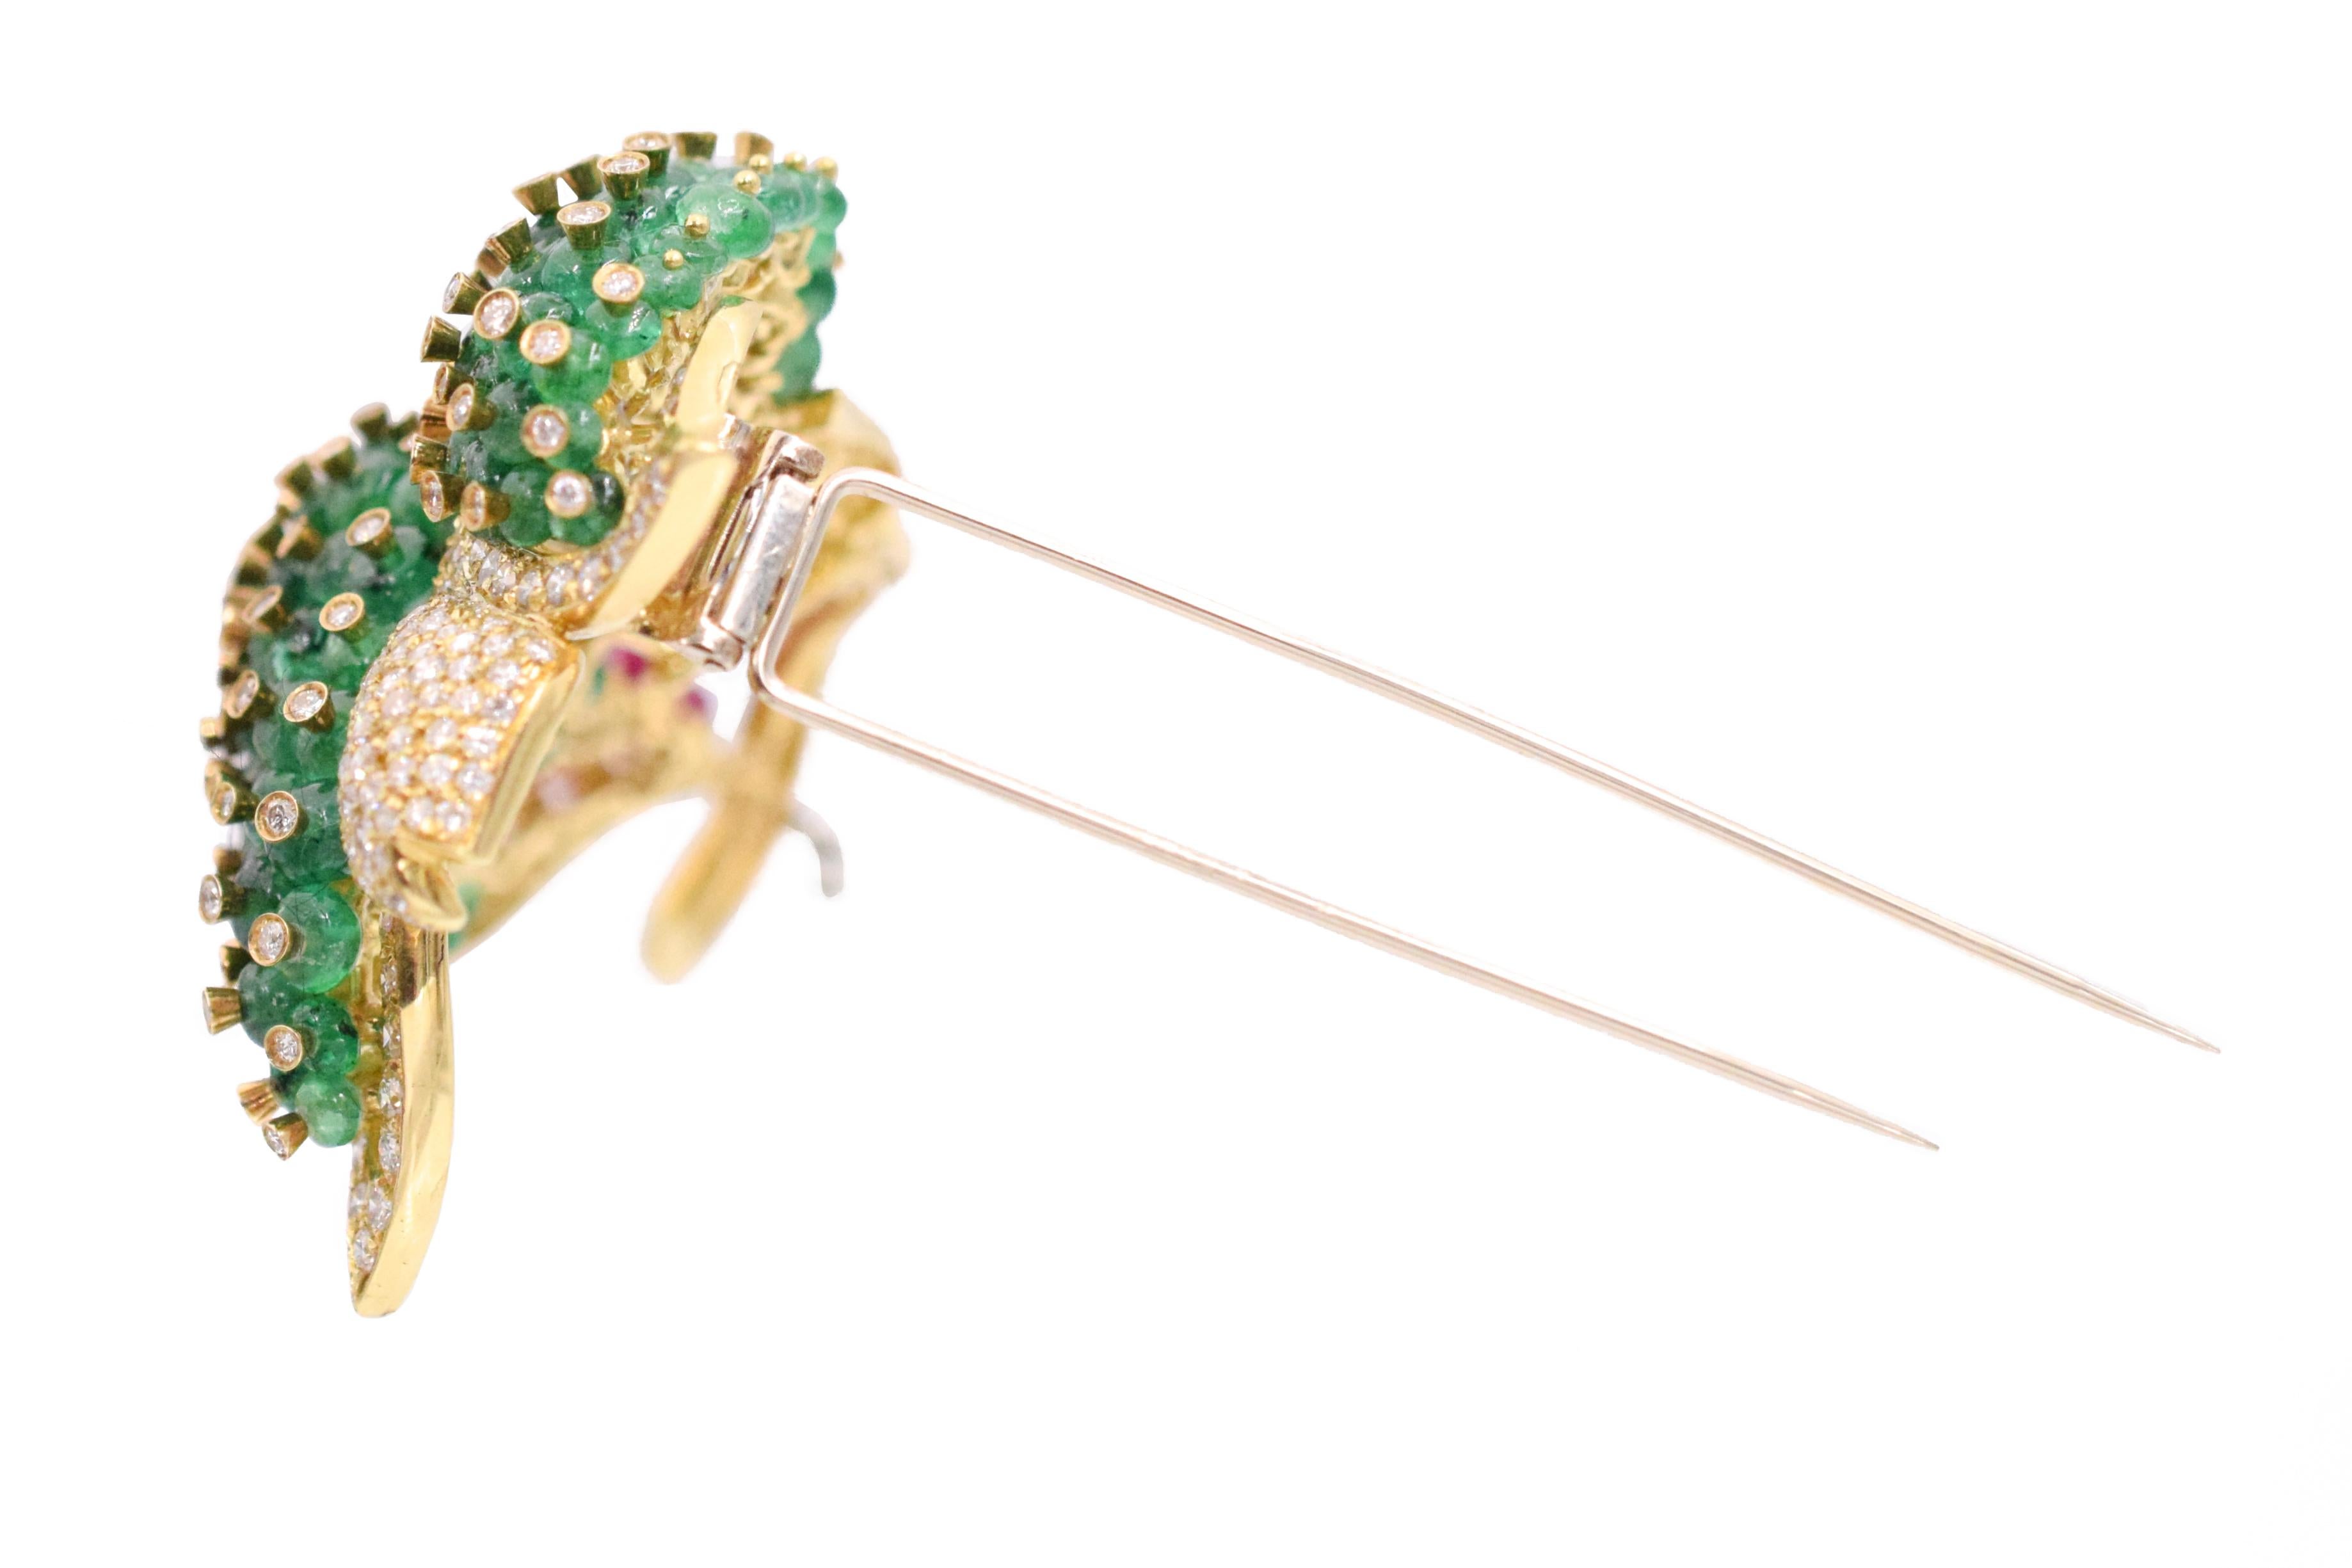 Gemstone, Diamond, and 18k Yellow Gold Flower Pin. This pin has 11ct of diamonds, 3ct of rubies, and 25ct of emeralds all set in 18k yellow gold. Stamped 750, GIOVANI, Italy